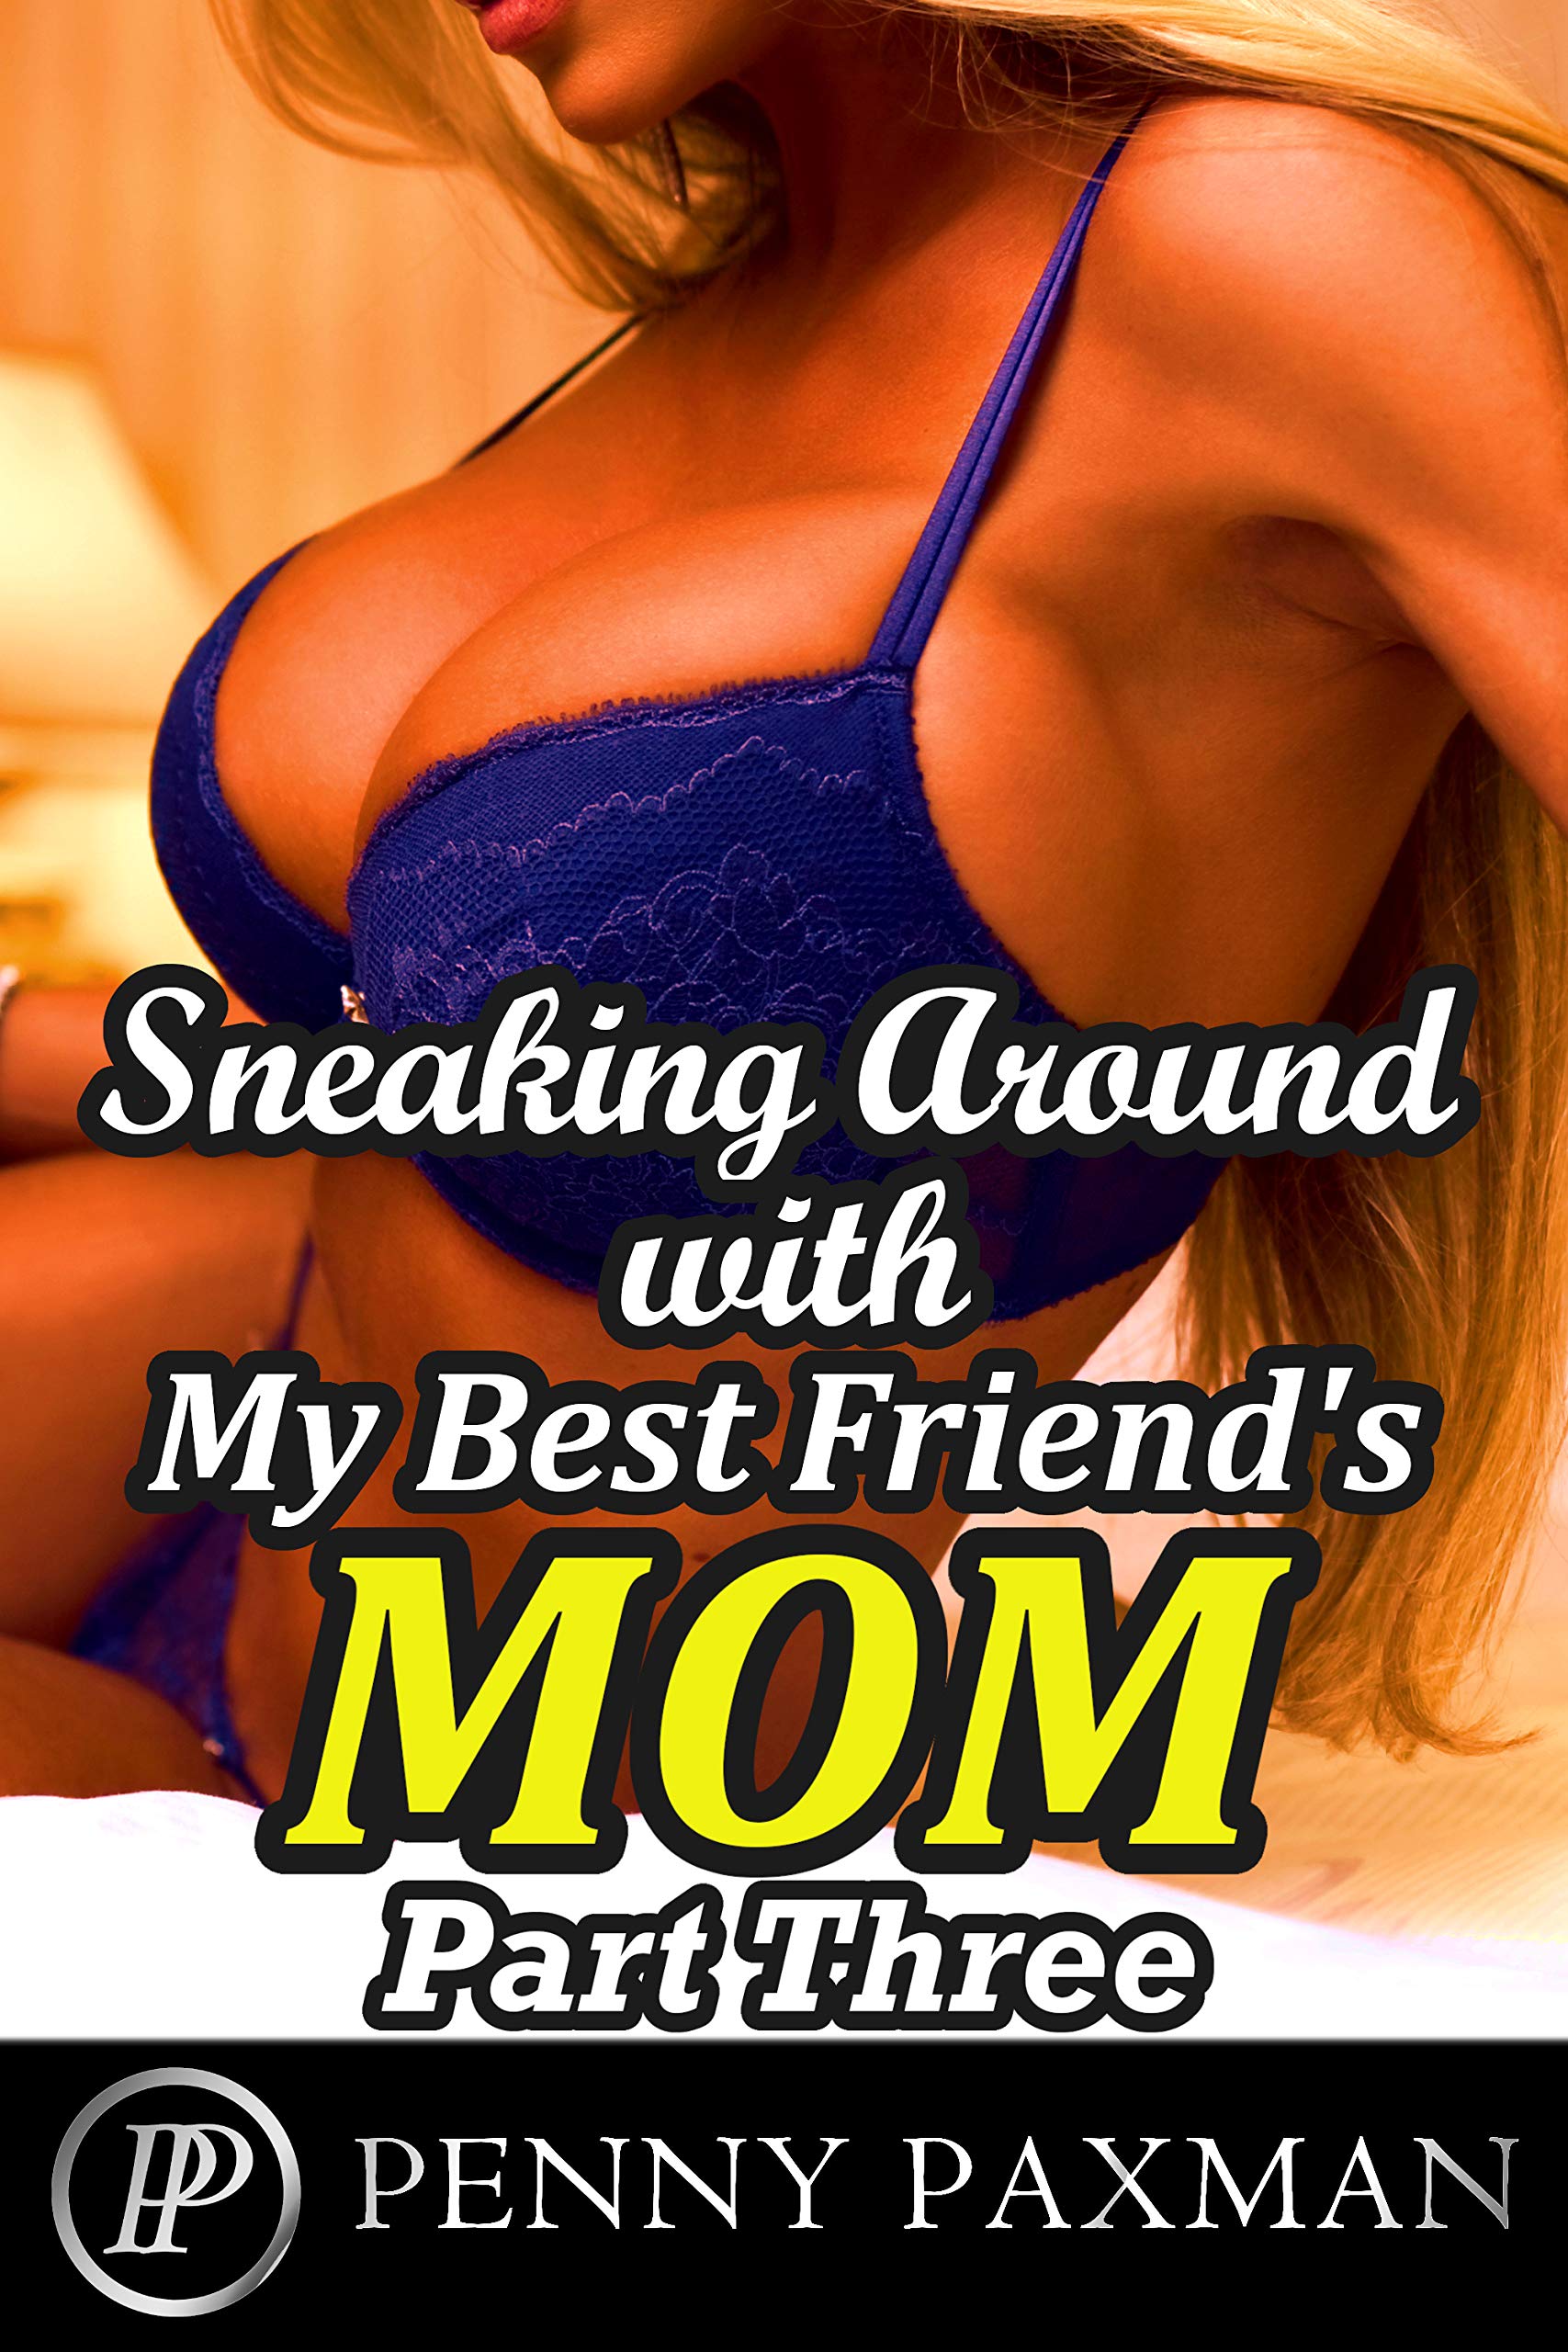 analyn policarpio recommends My Best Freinds Hot Mum